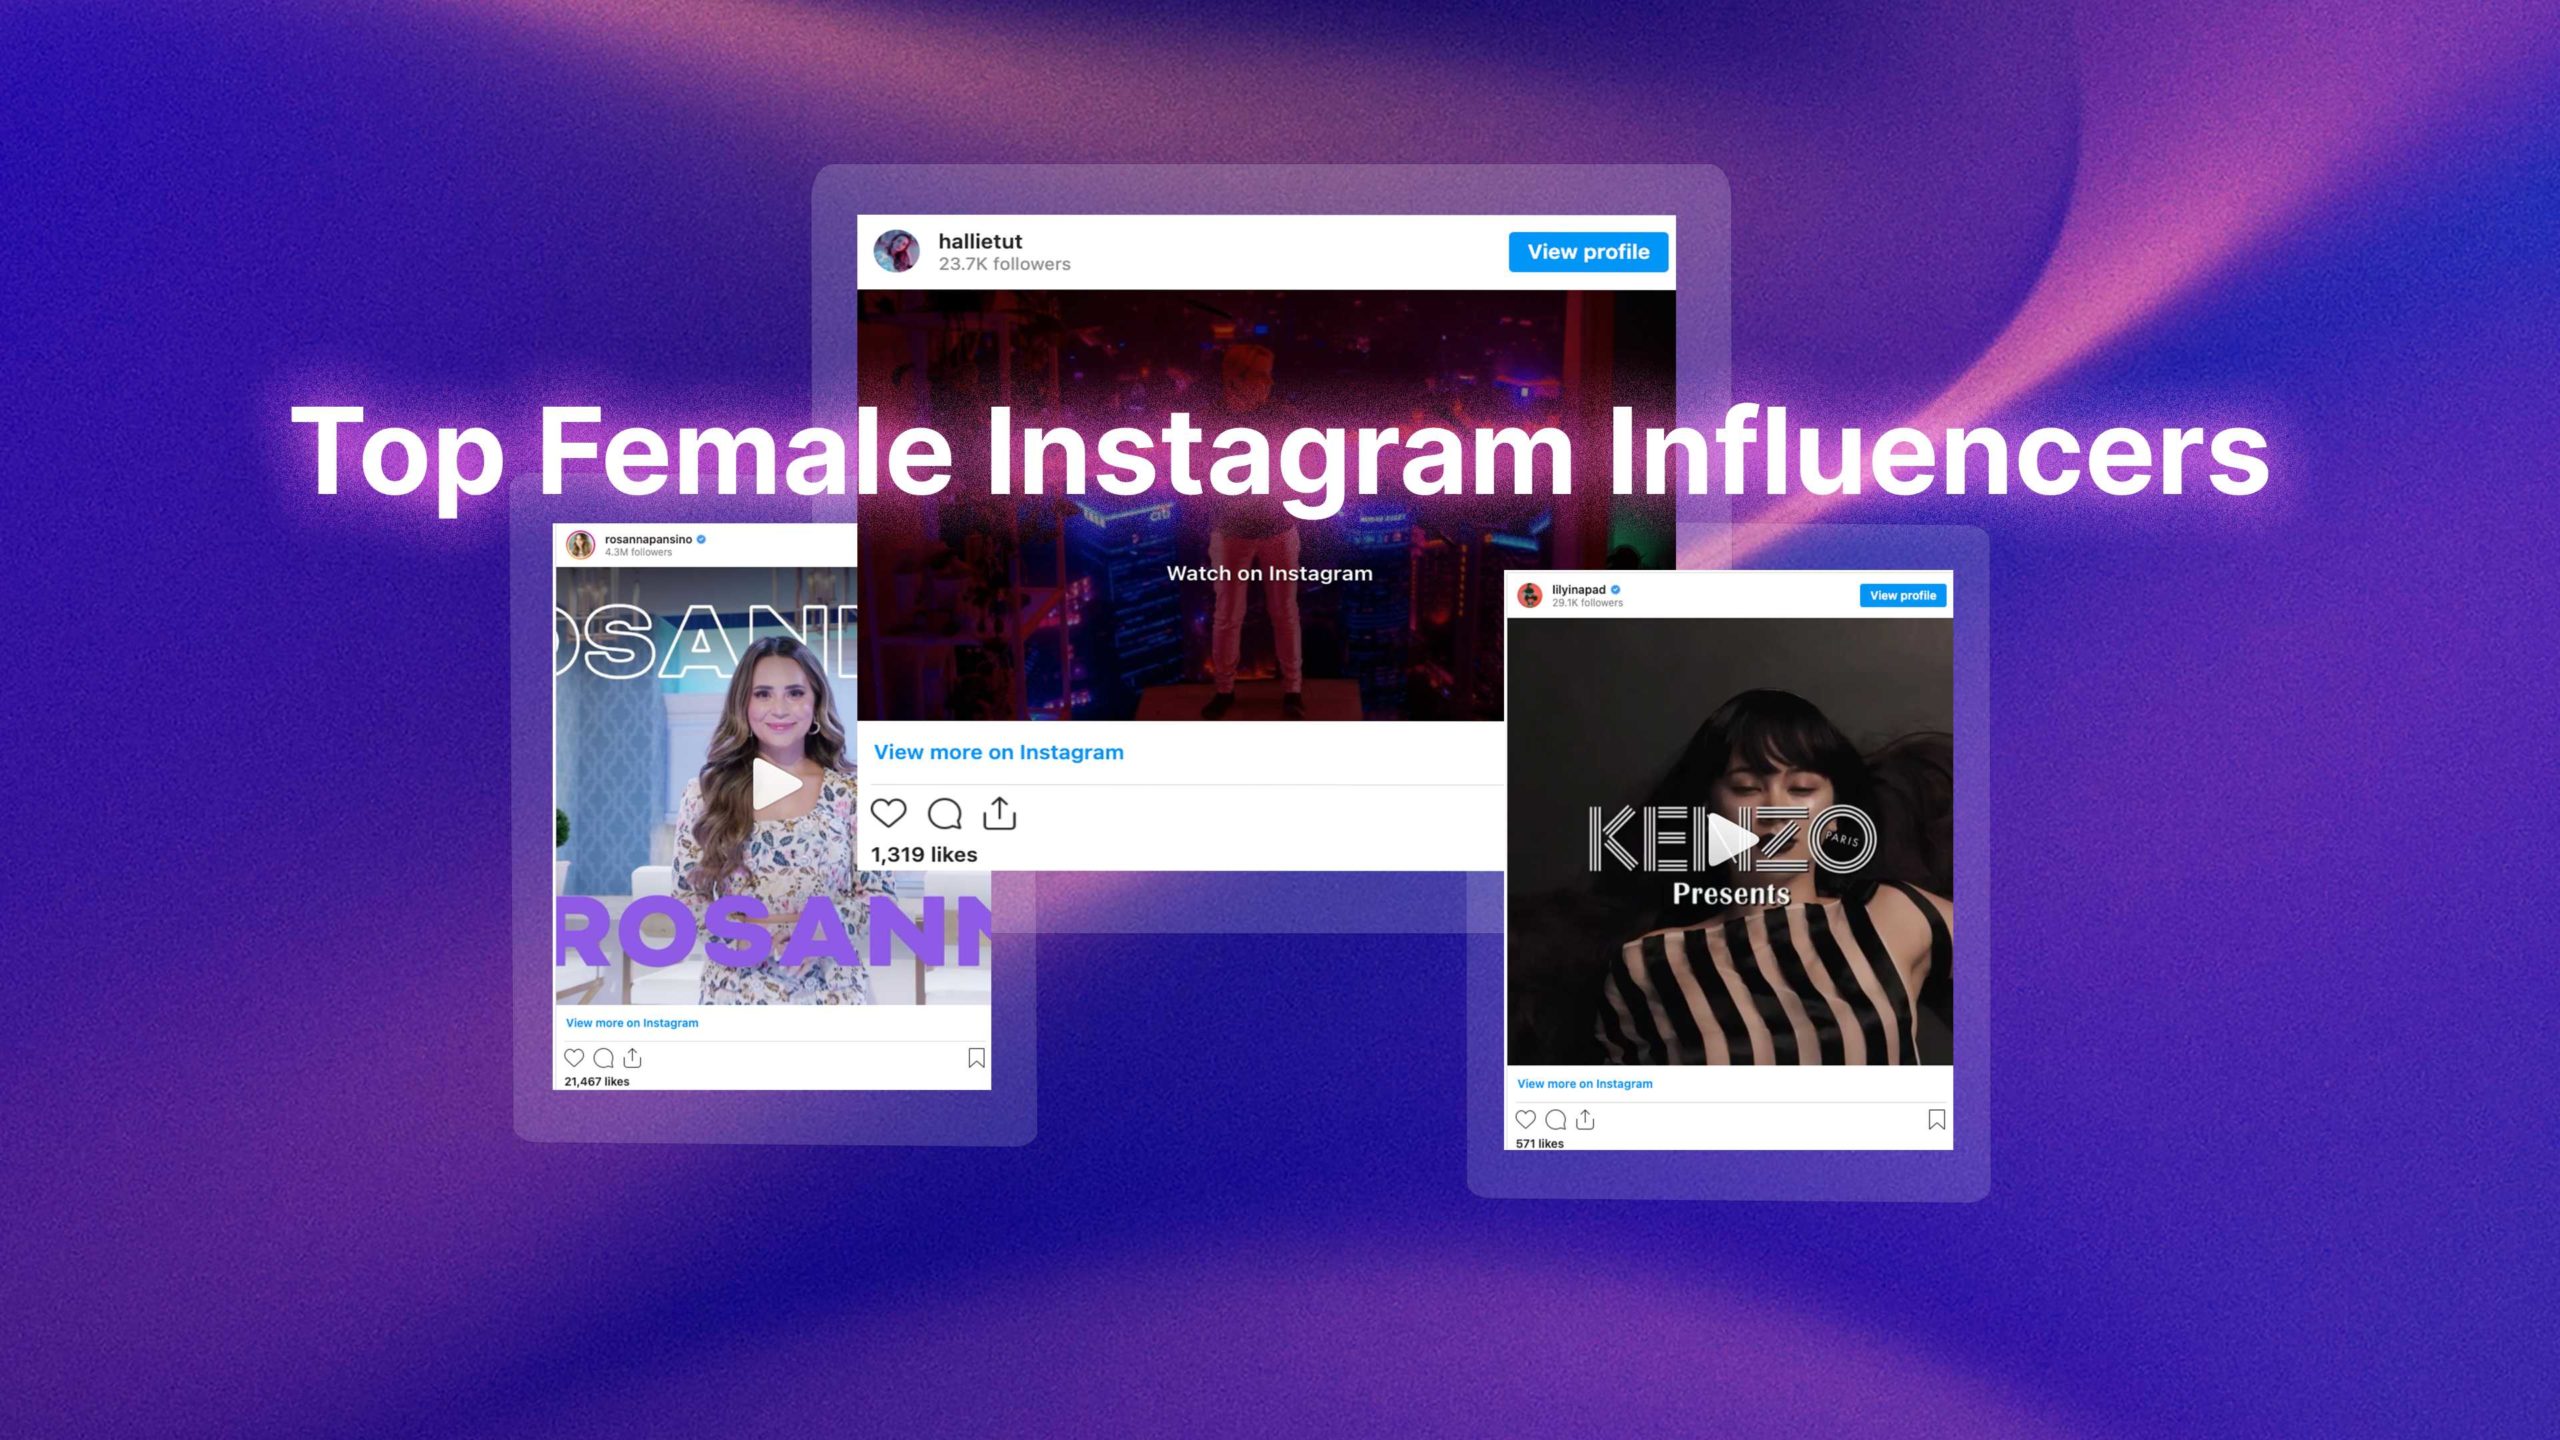 Meet the 24 Top Female Instagram Influencers Hot Accounts to Follow